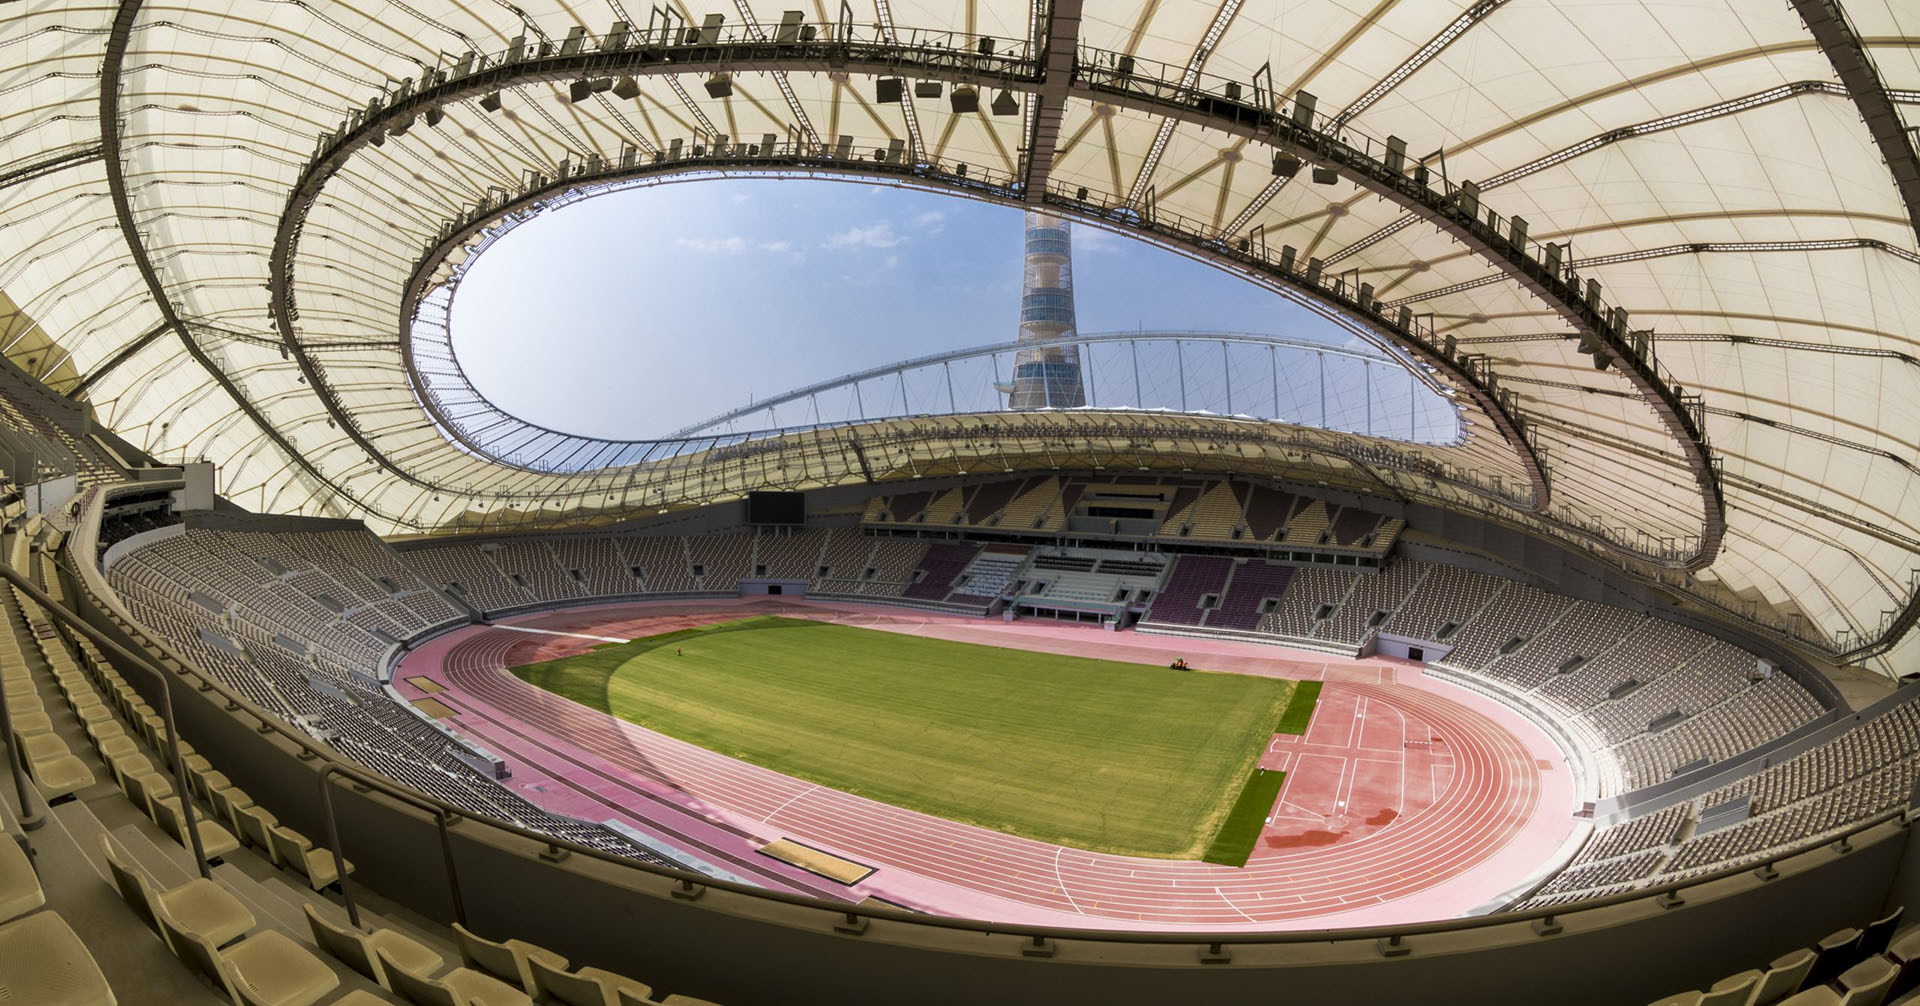 How does a 2022 World Cup stadium cool itself?